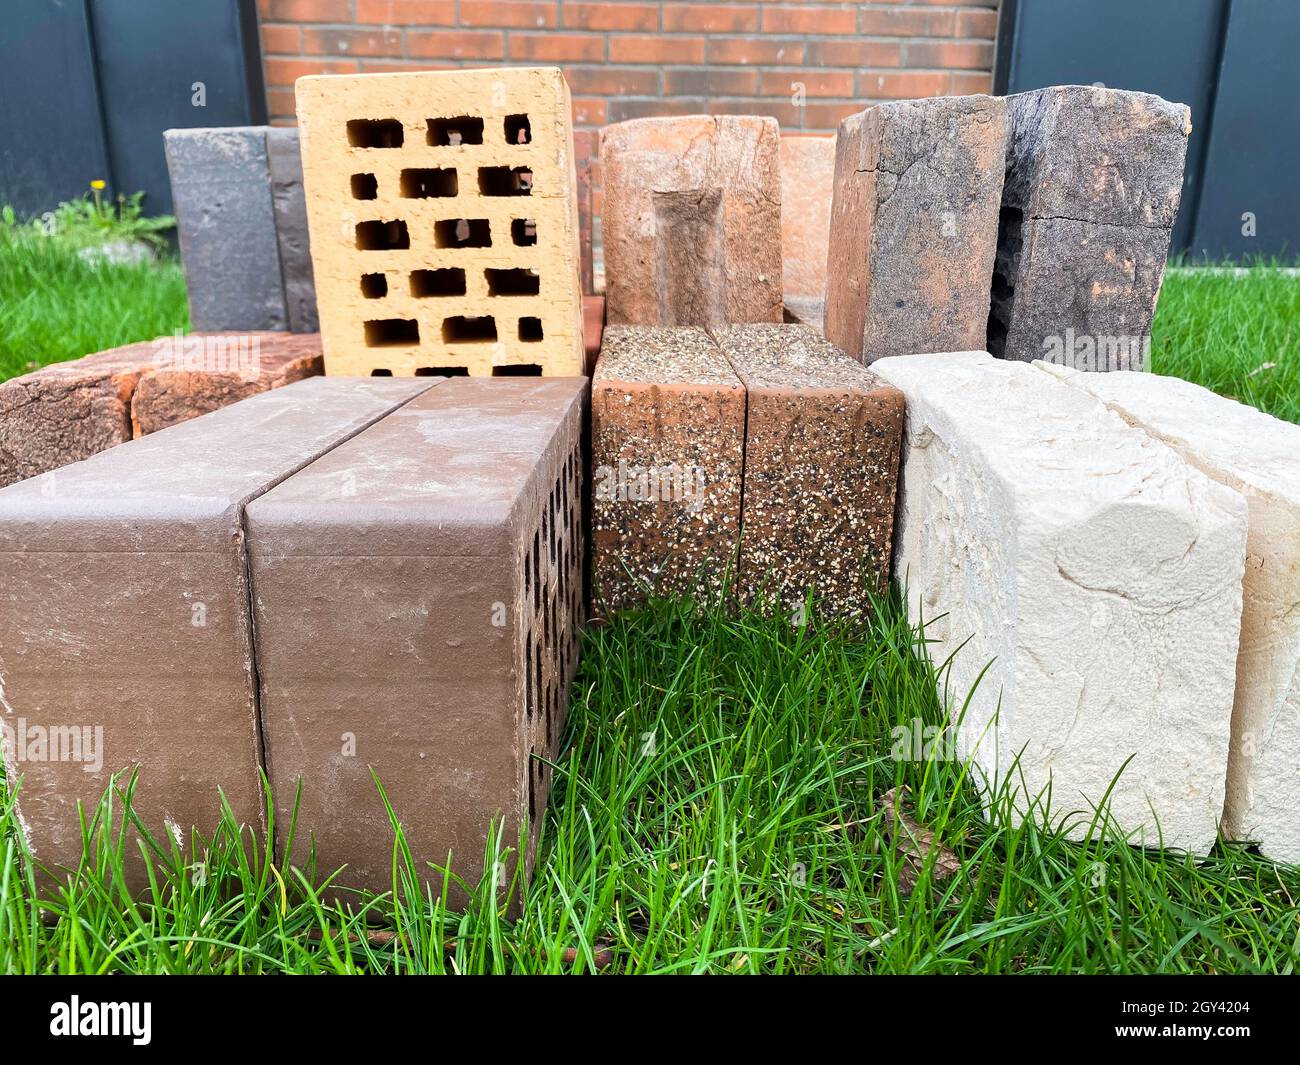 Different types of bricks stacked beautifully on green grass Stock Photo